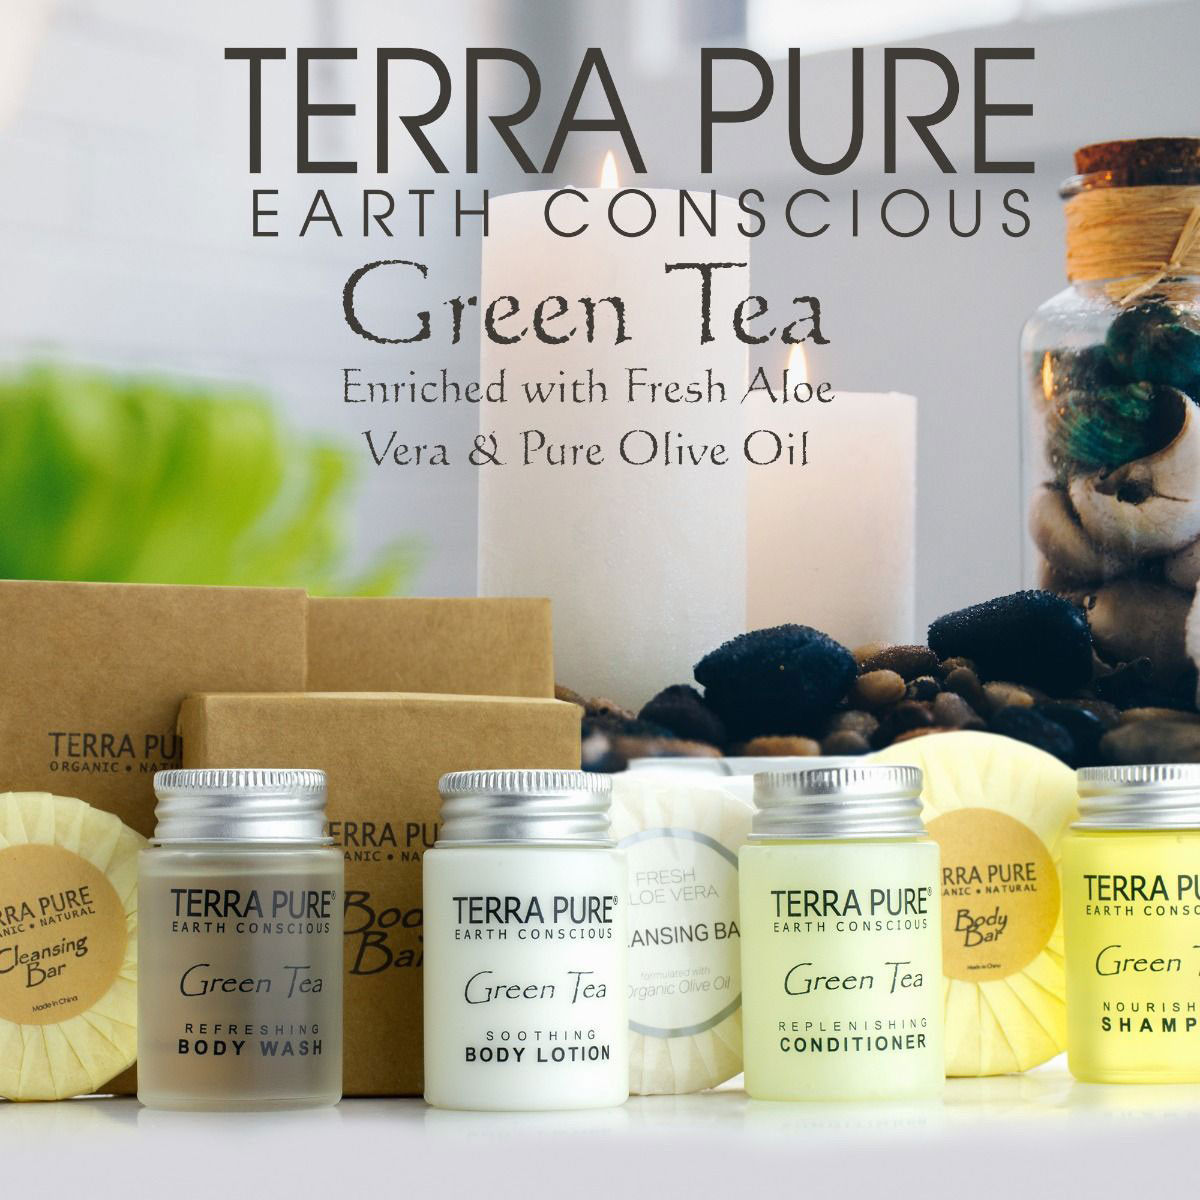 What aesthetic does the TERRA PURE GREEN TEA Collection's amenity program showcase?